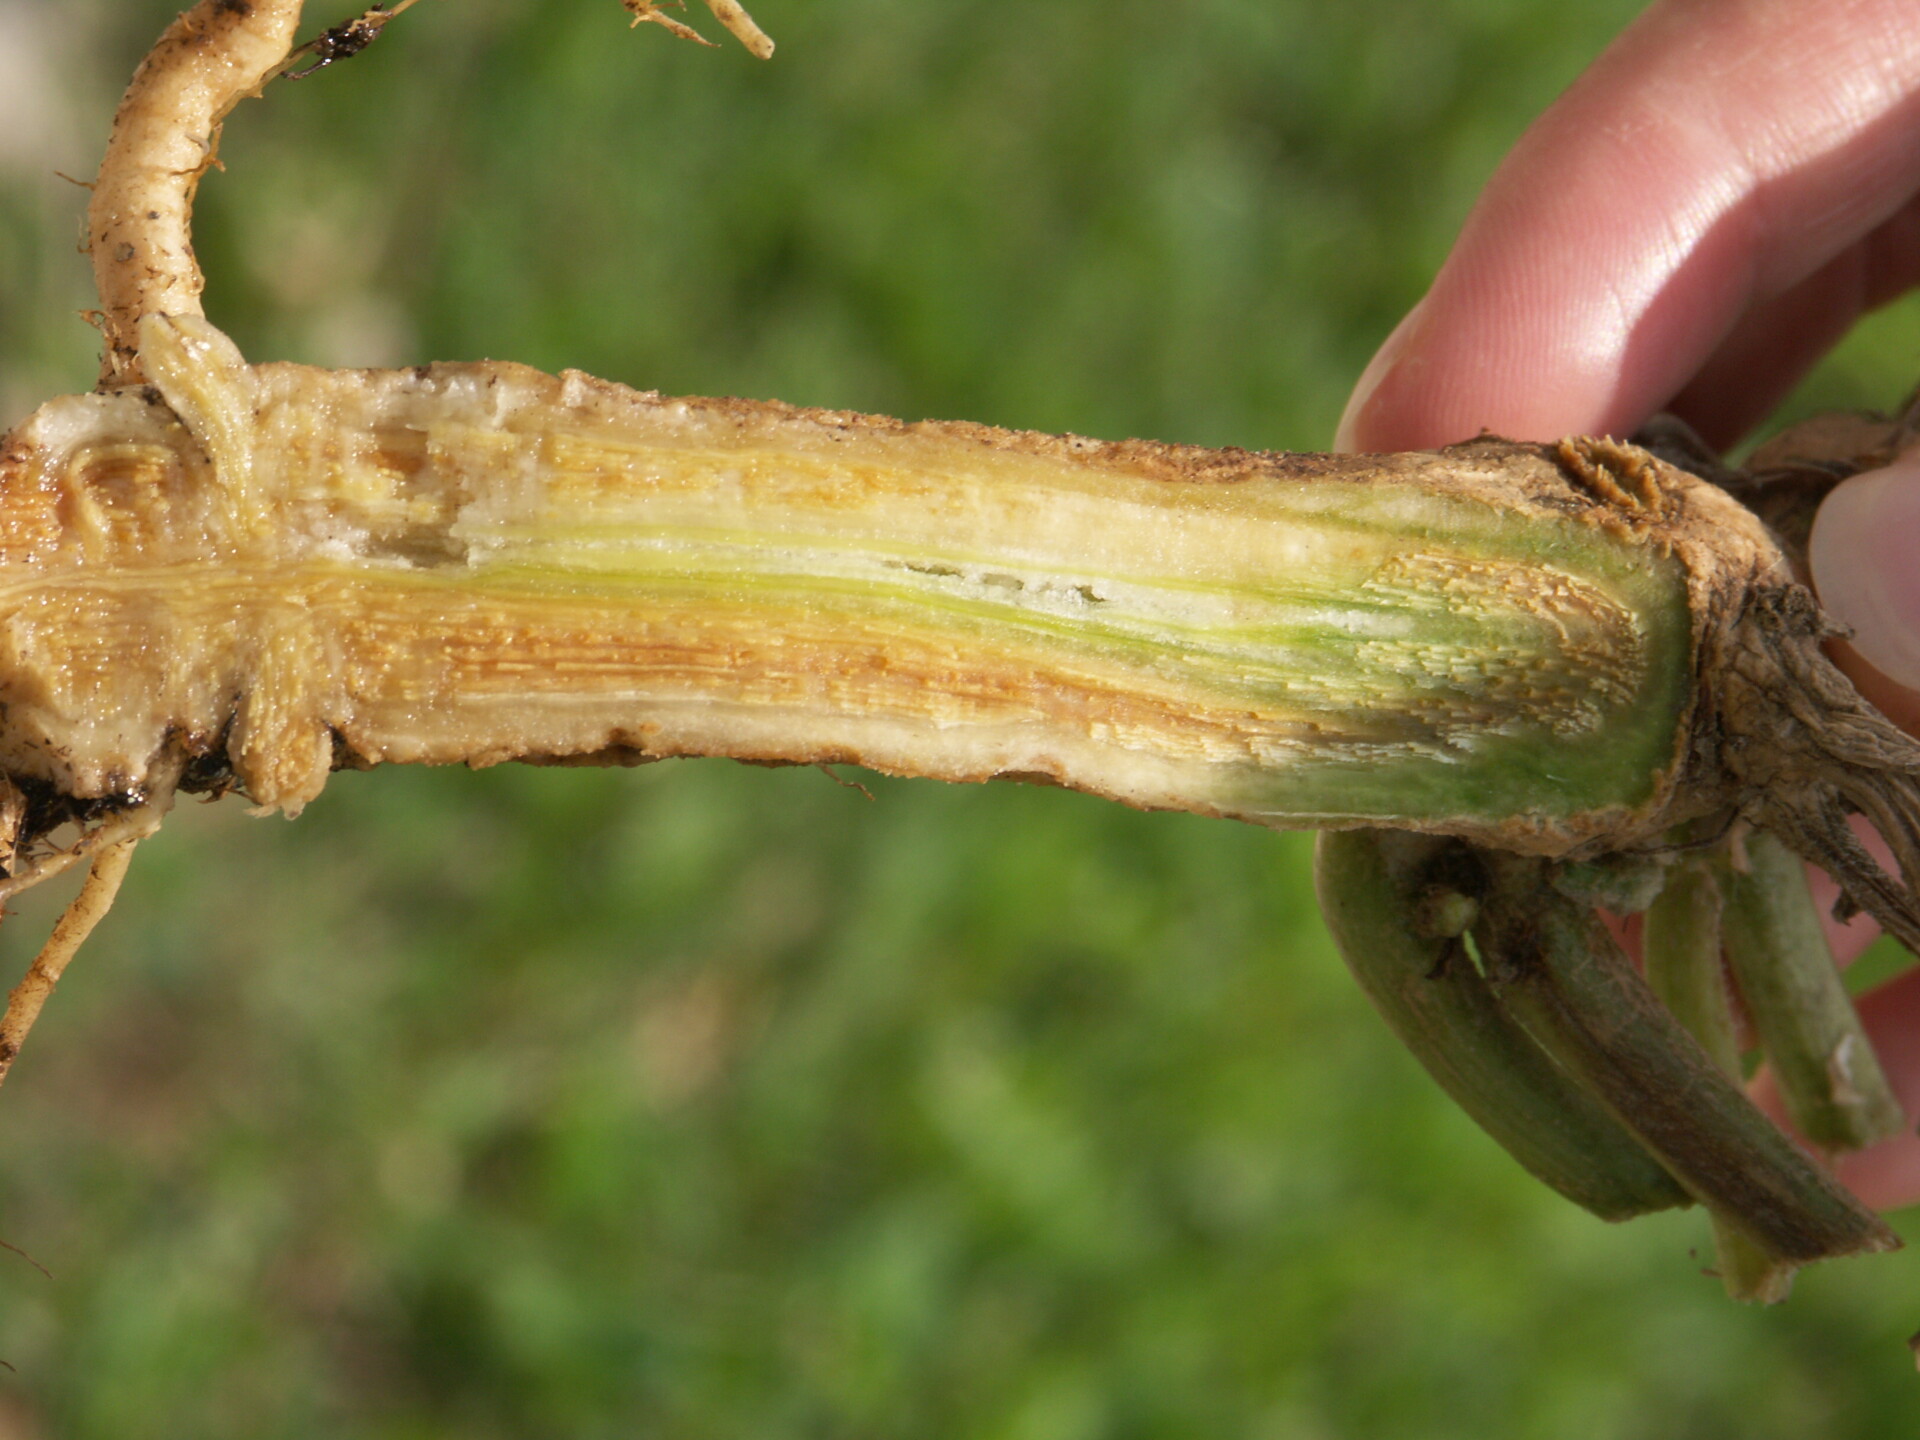 Figure 2. Vascular discoloration present in lower stem may be a symptom of Fusarium wilt of watermelon.